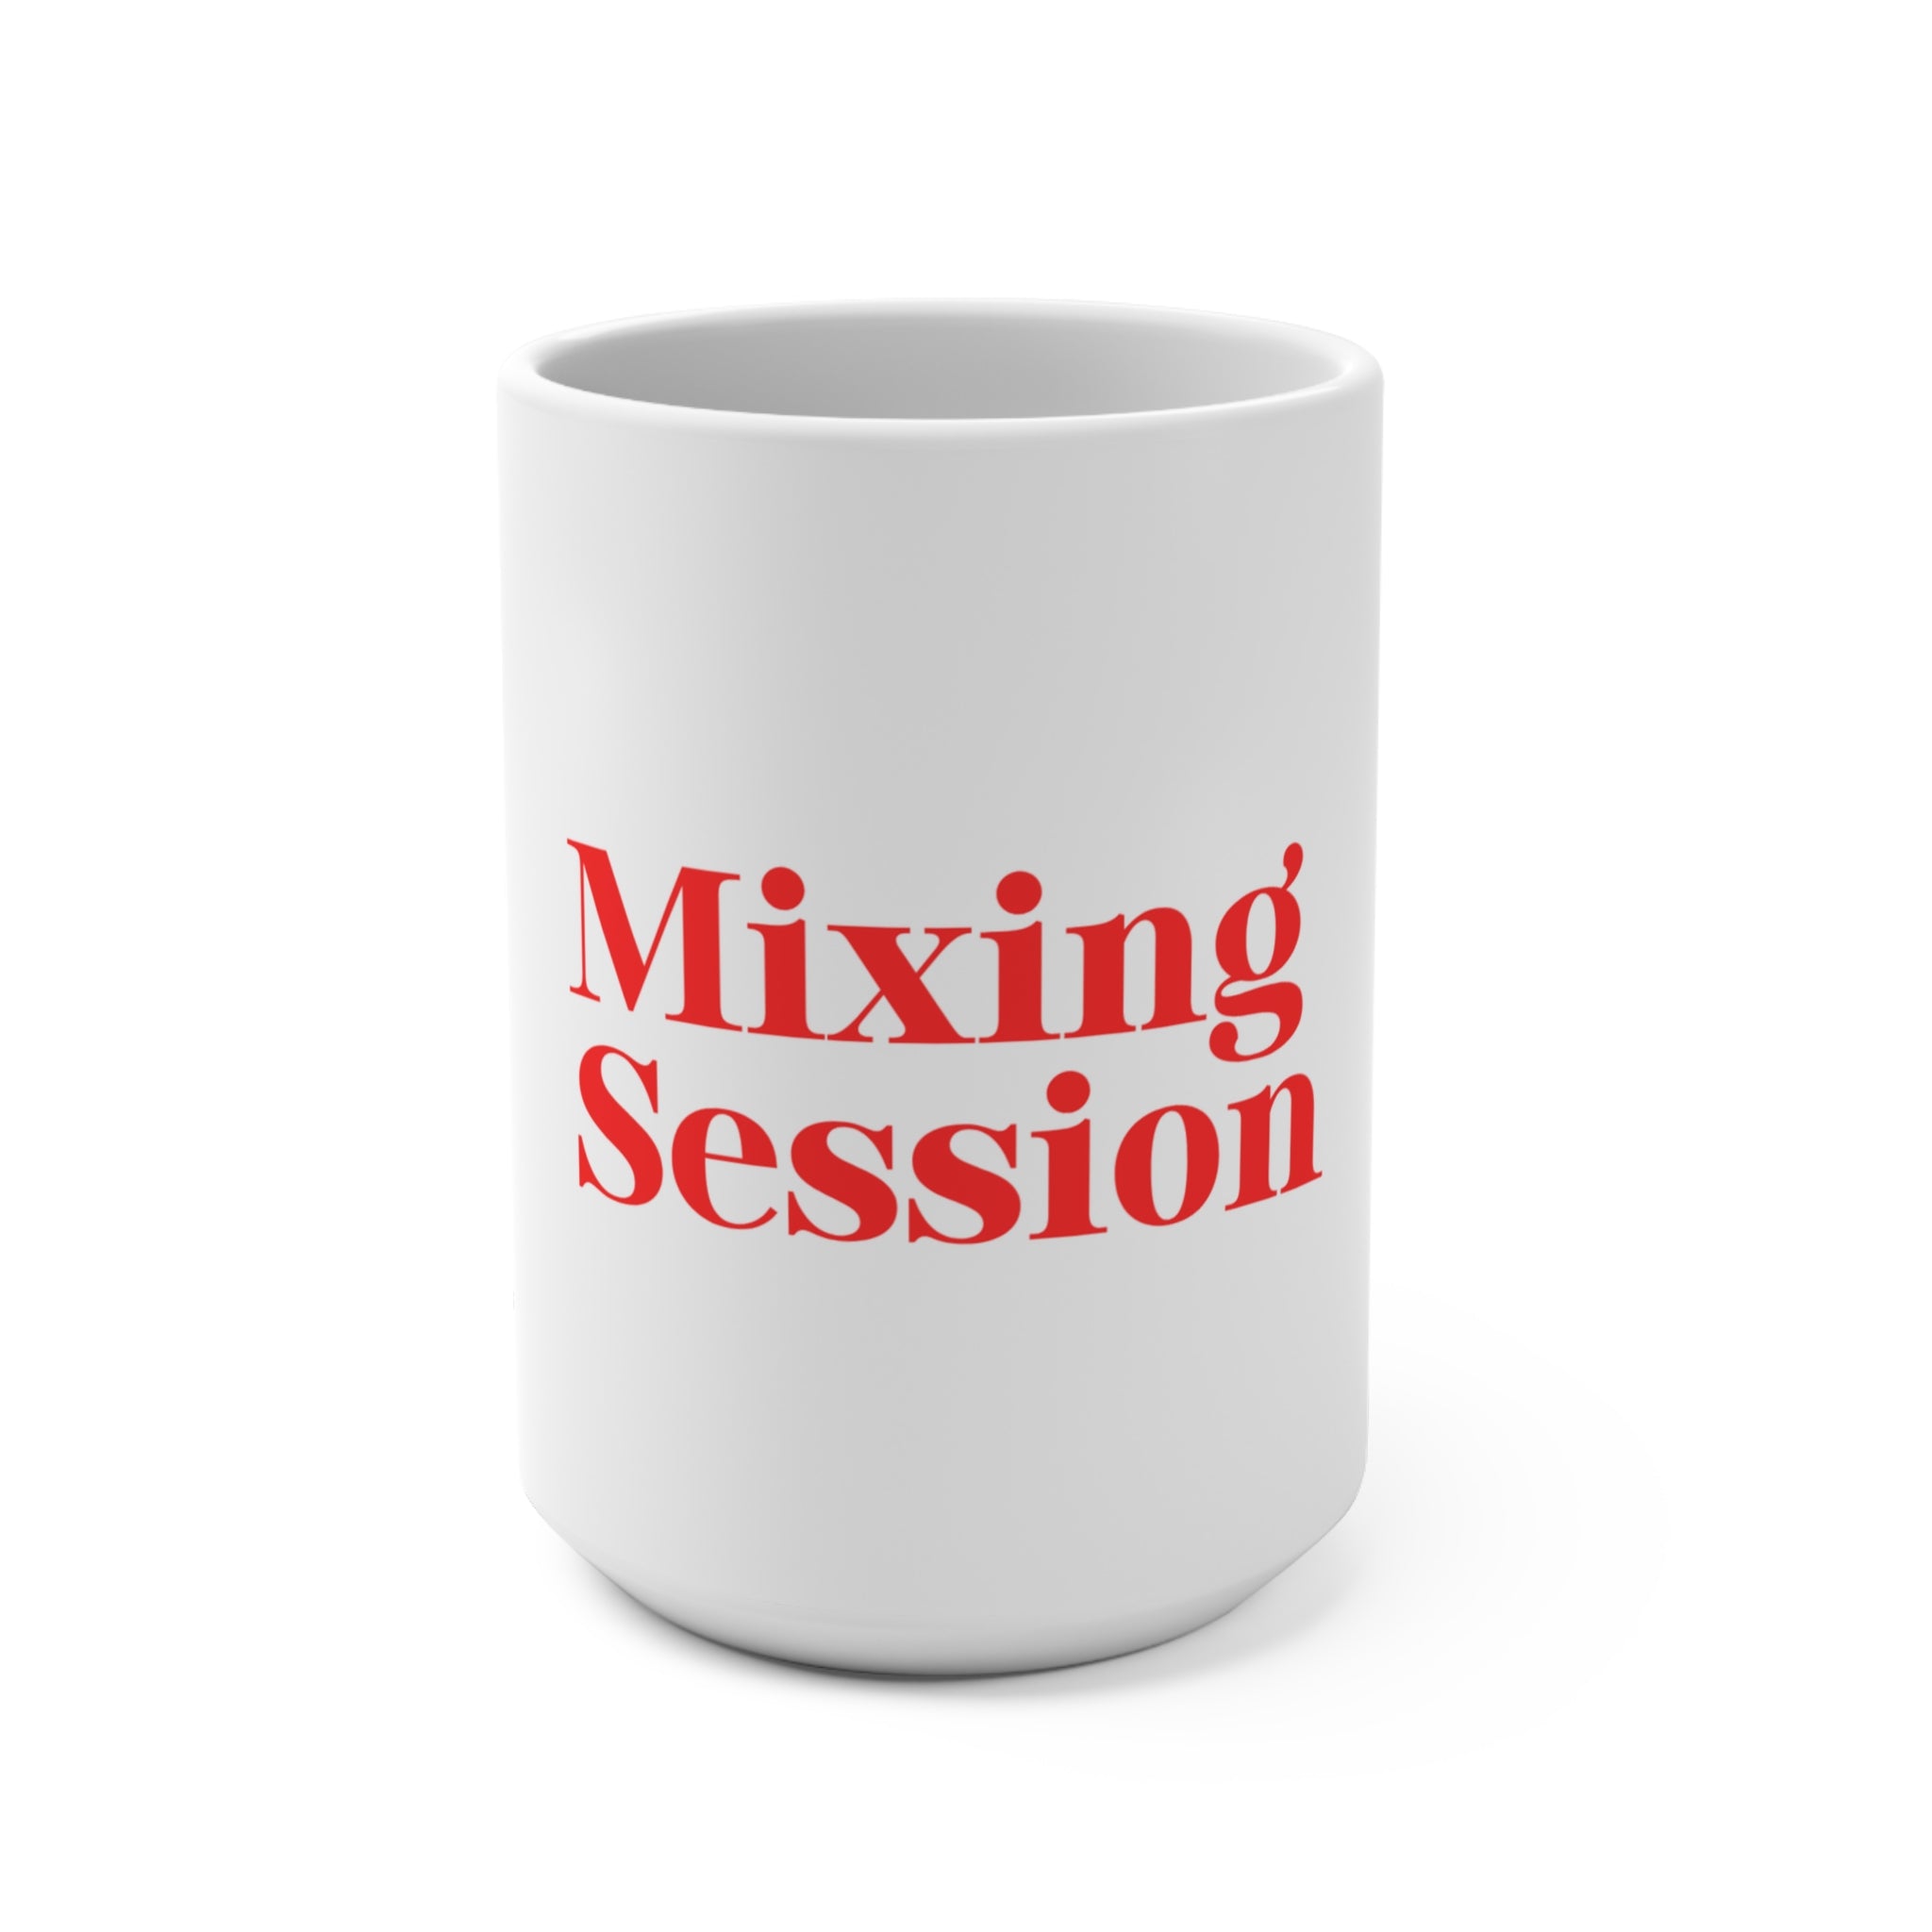 A white ceramic mug with the words 'Mixing Session' printed in red italicized letters, angled upwards to give a sense of movement. The text is designed to evoke the dynamic and creative energy of a music mixing session.